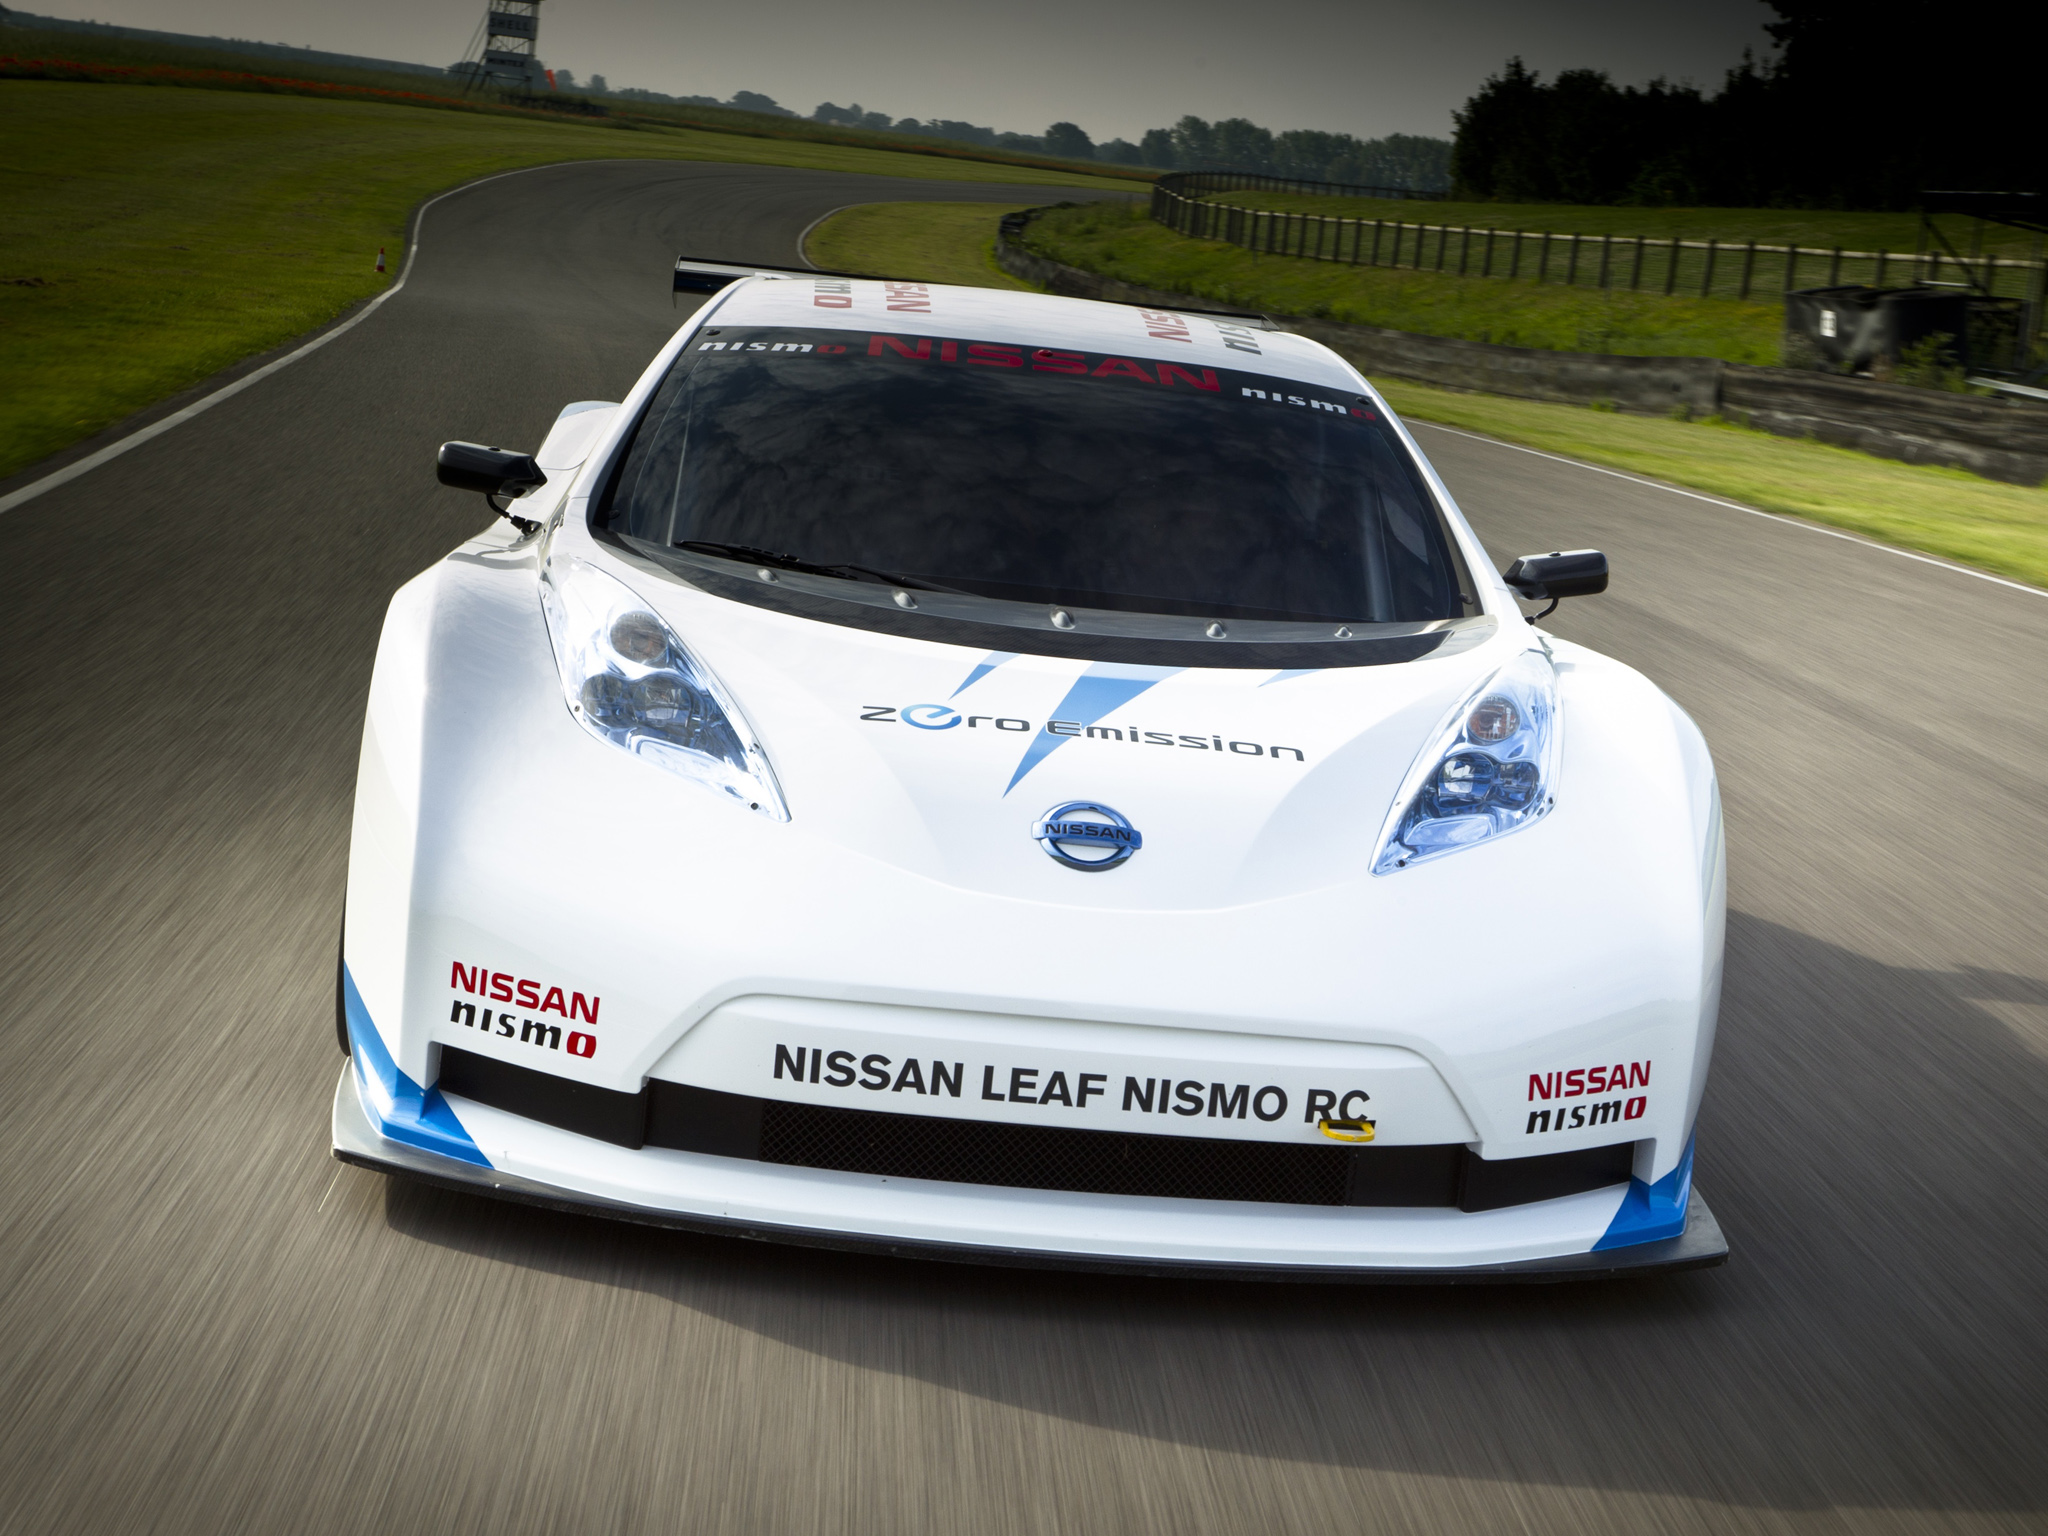 2011, Nissan, Leaf, Nismo, R c, Race, Racing, Tuning, Electric, Supercar, Supercars, Fq Wallpaper